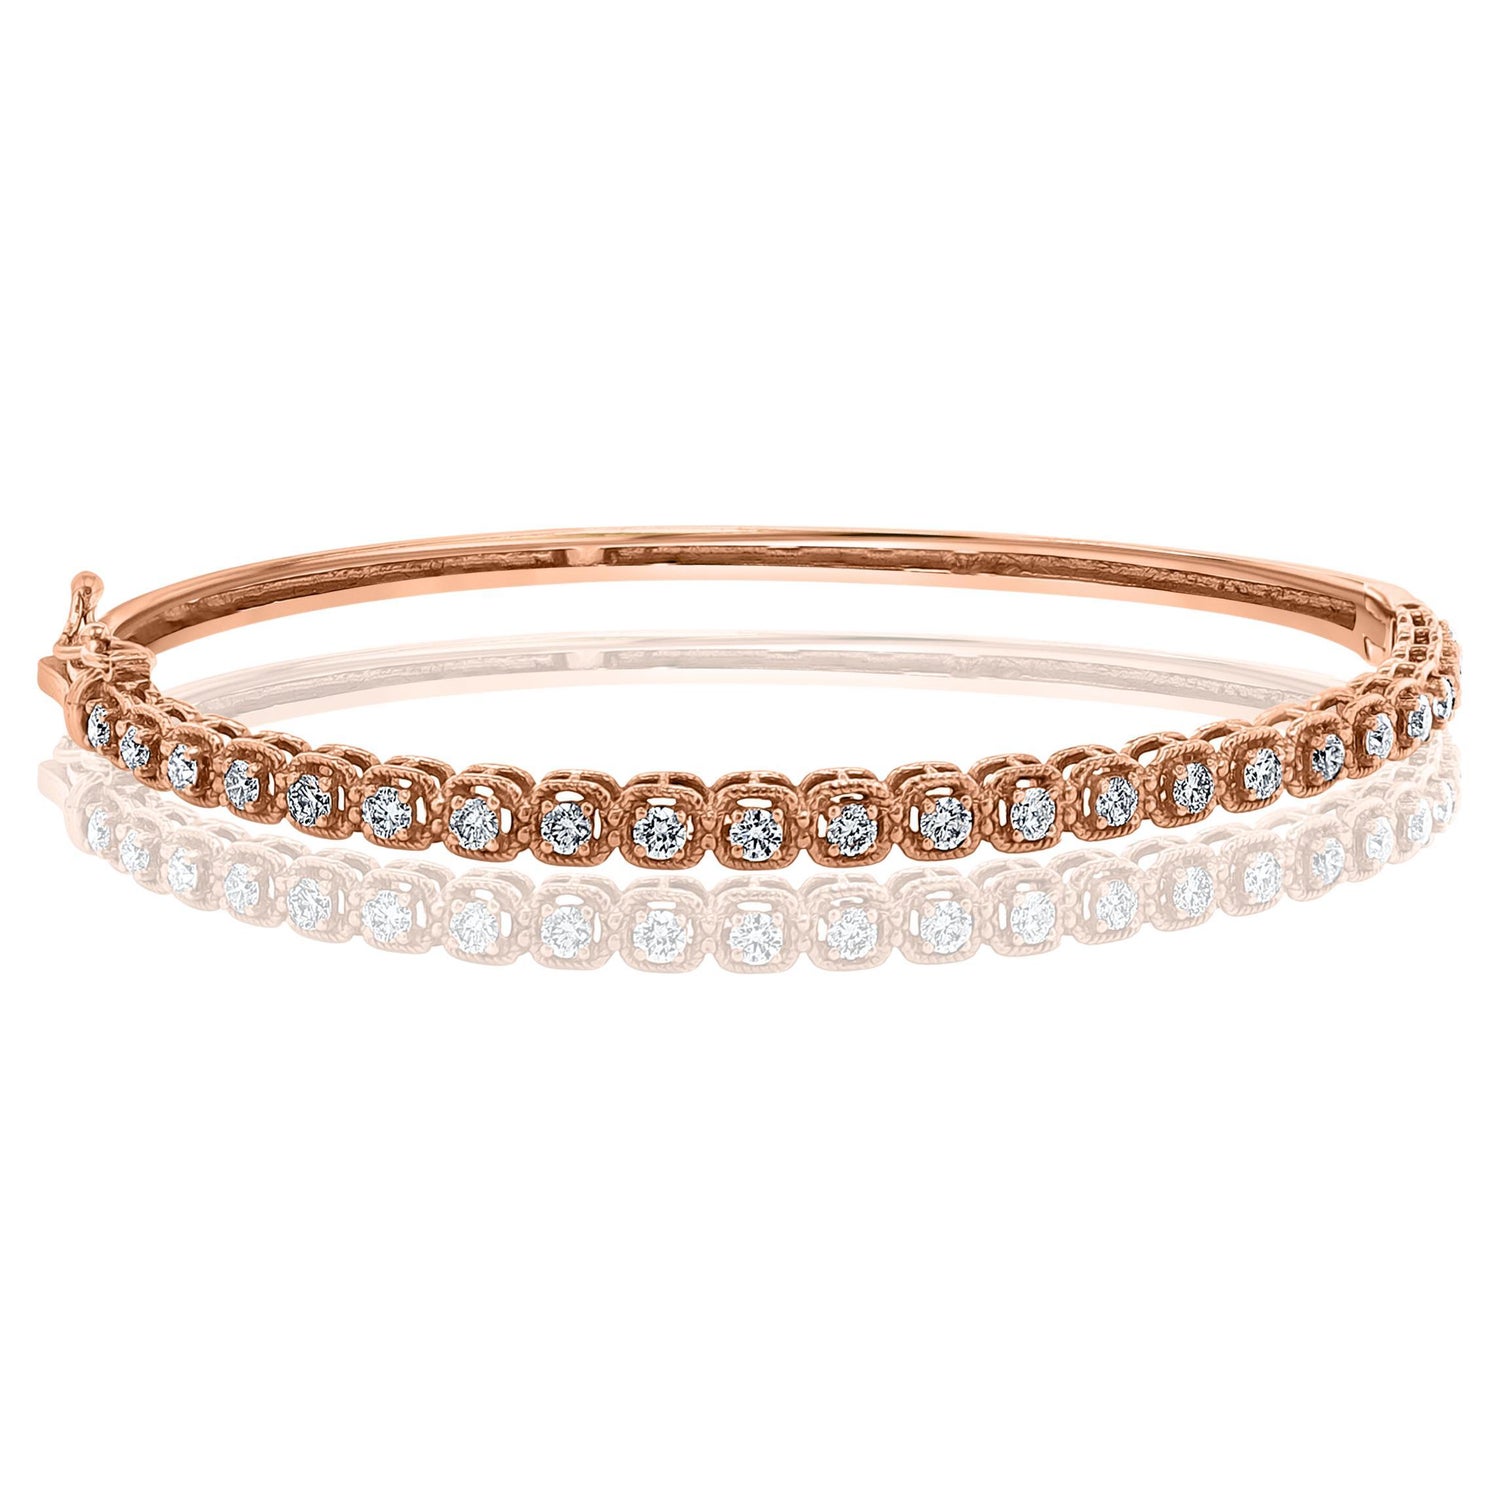 Sapphire Magnificent bracelet with easy lock in 18K Rose Gold - S